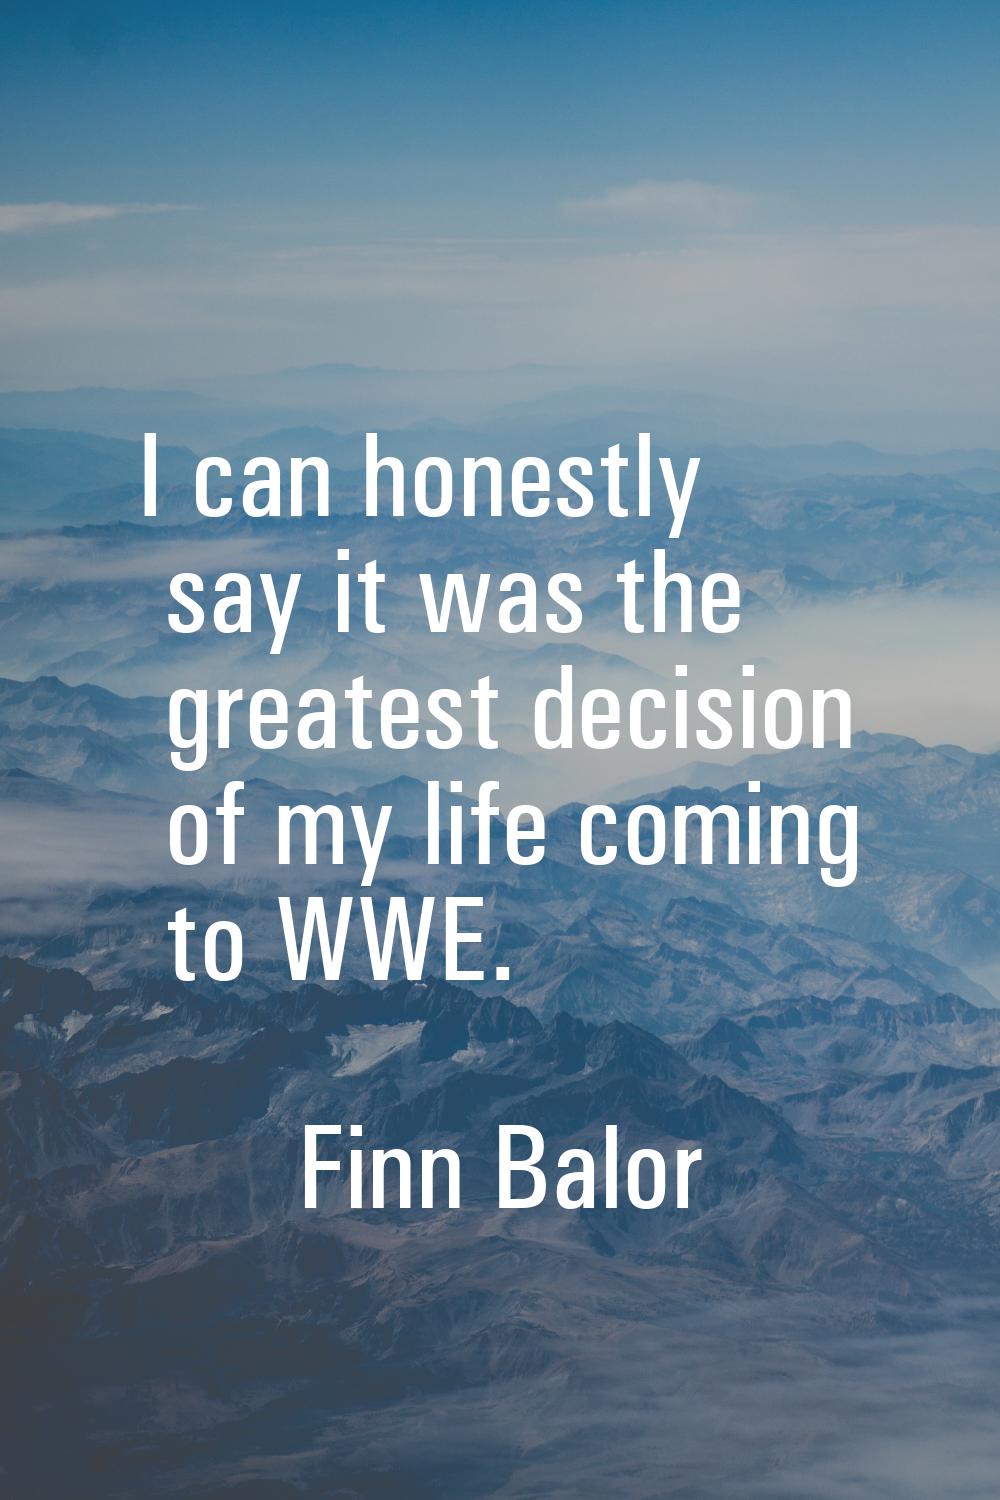 I can honestly say it was the greatest decision of my life coming to WWE.